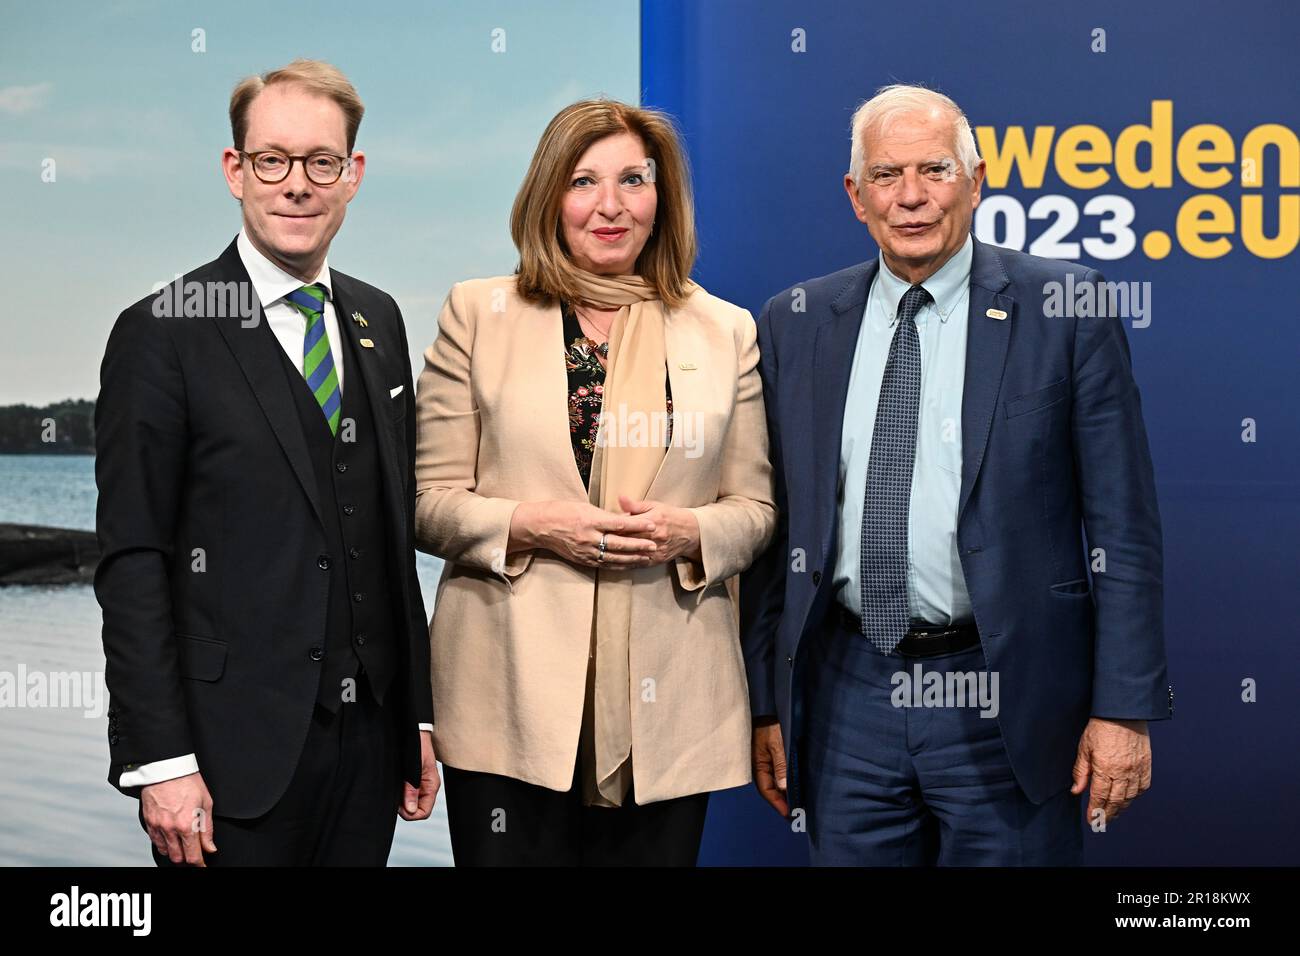 Stockholm, Sweden. 12th May, 2023. STOCKHOLM 20230512 Josep Borrell Fontelles, High Representative of the Union for Foreign Affairs and Security Policy, Vice-President of the Commission and Tobias Billström, Minister for Foreign Affairs, Sweden welcome Maryem van den Heuvel, Director General for External Relations, General Secretariat of the Council in connection with the fact that the EU's foreign ministers and relevant EU commissioners gathered in Stockholm on Friday for an informal meeting. Photo: Jonas Ekströmer/TT/code 10030 Credit: TT News Agency/Alamy Live News Stock Photo